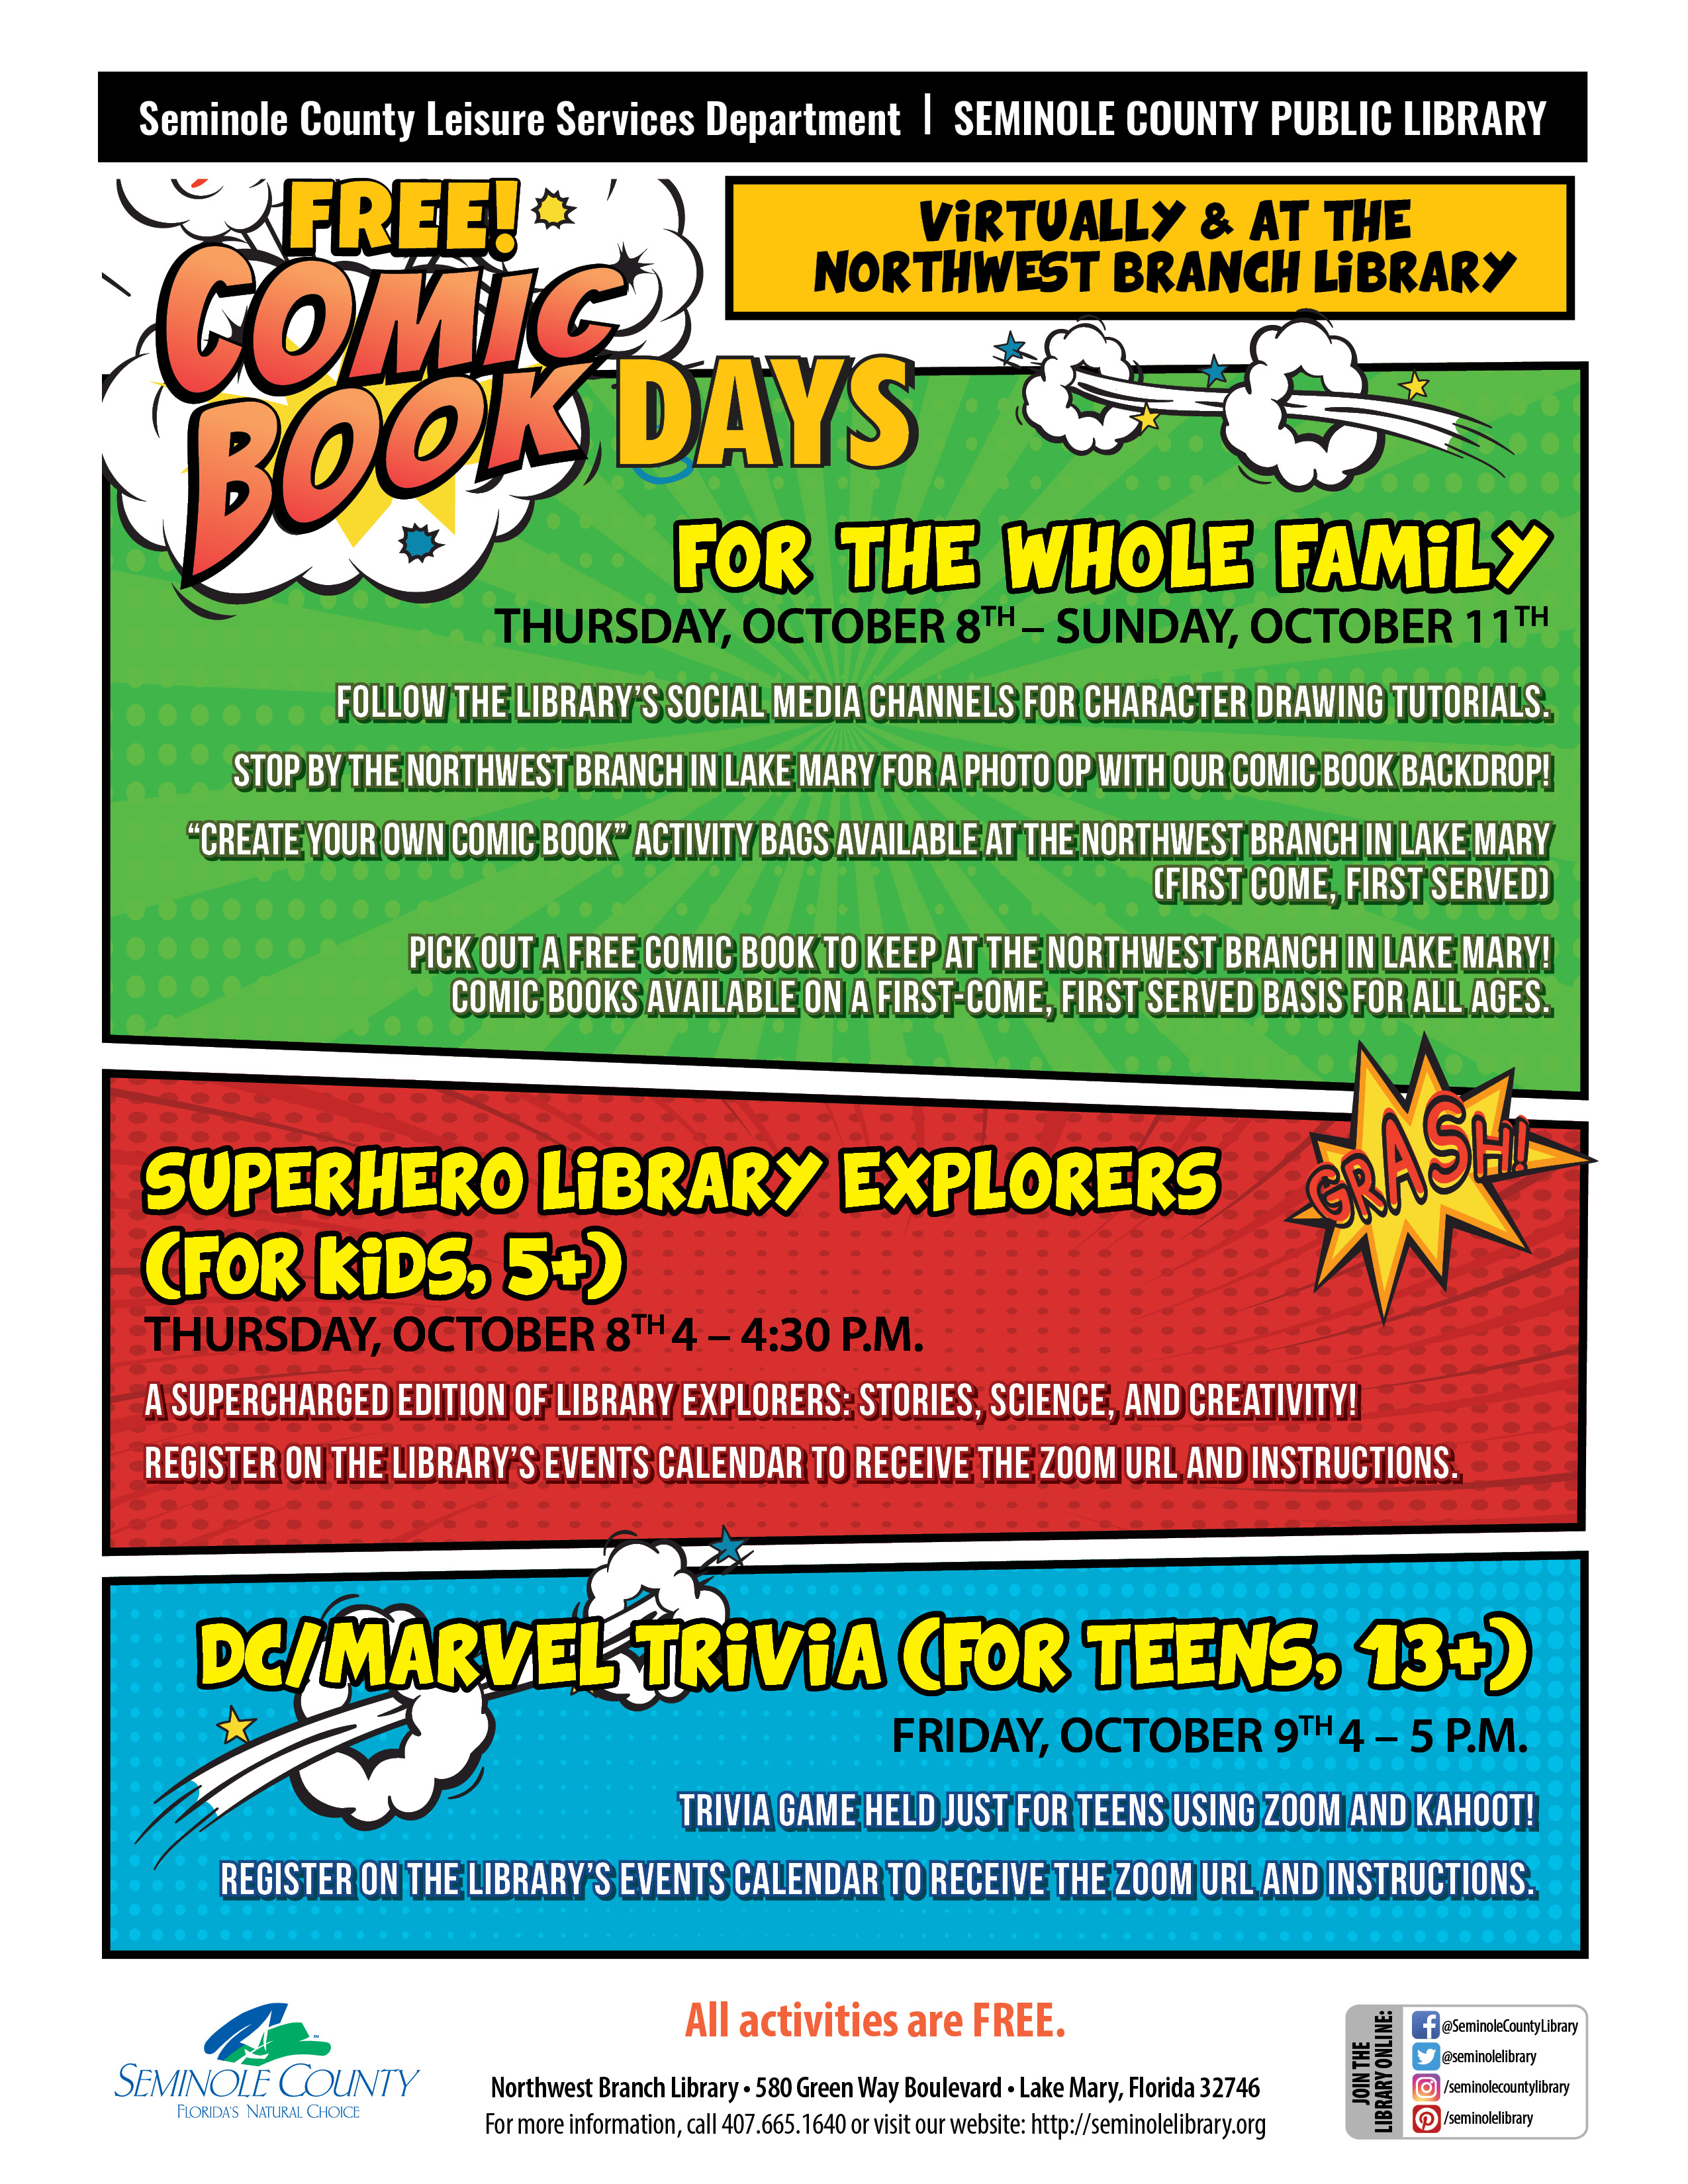 SPECIAL EVENTS FOR KIDS Seminole County